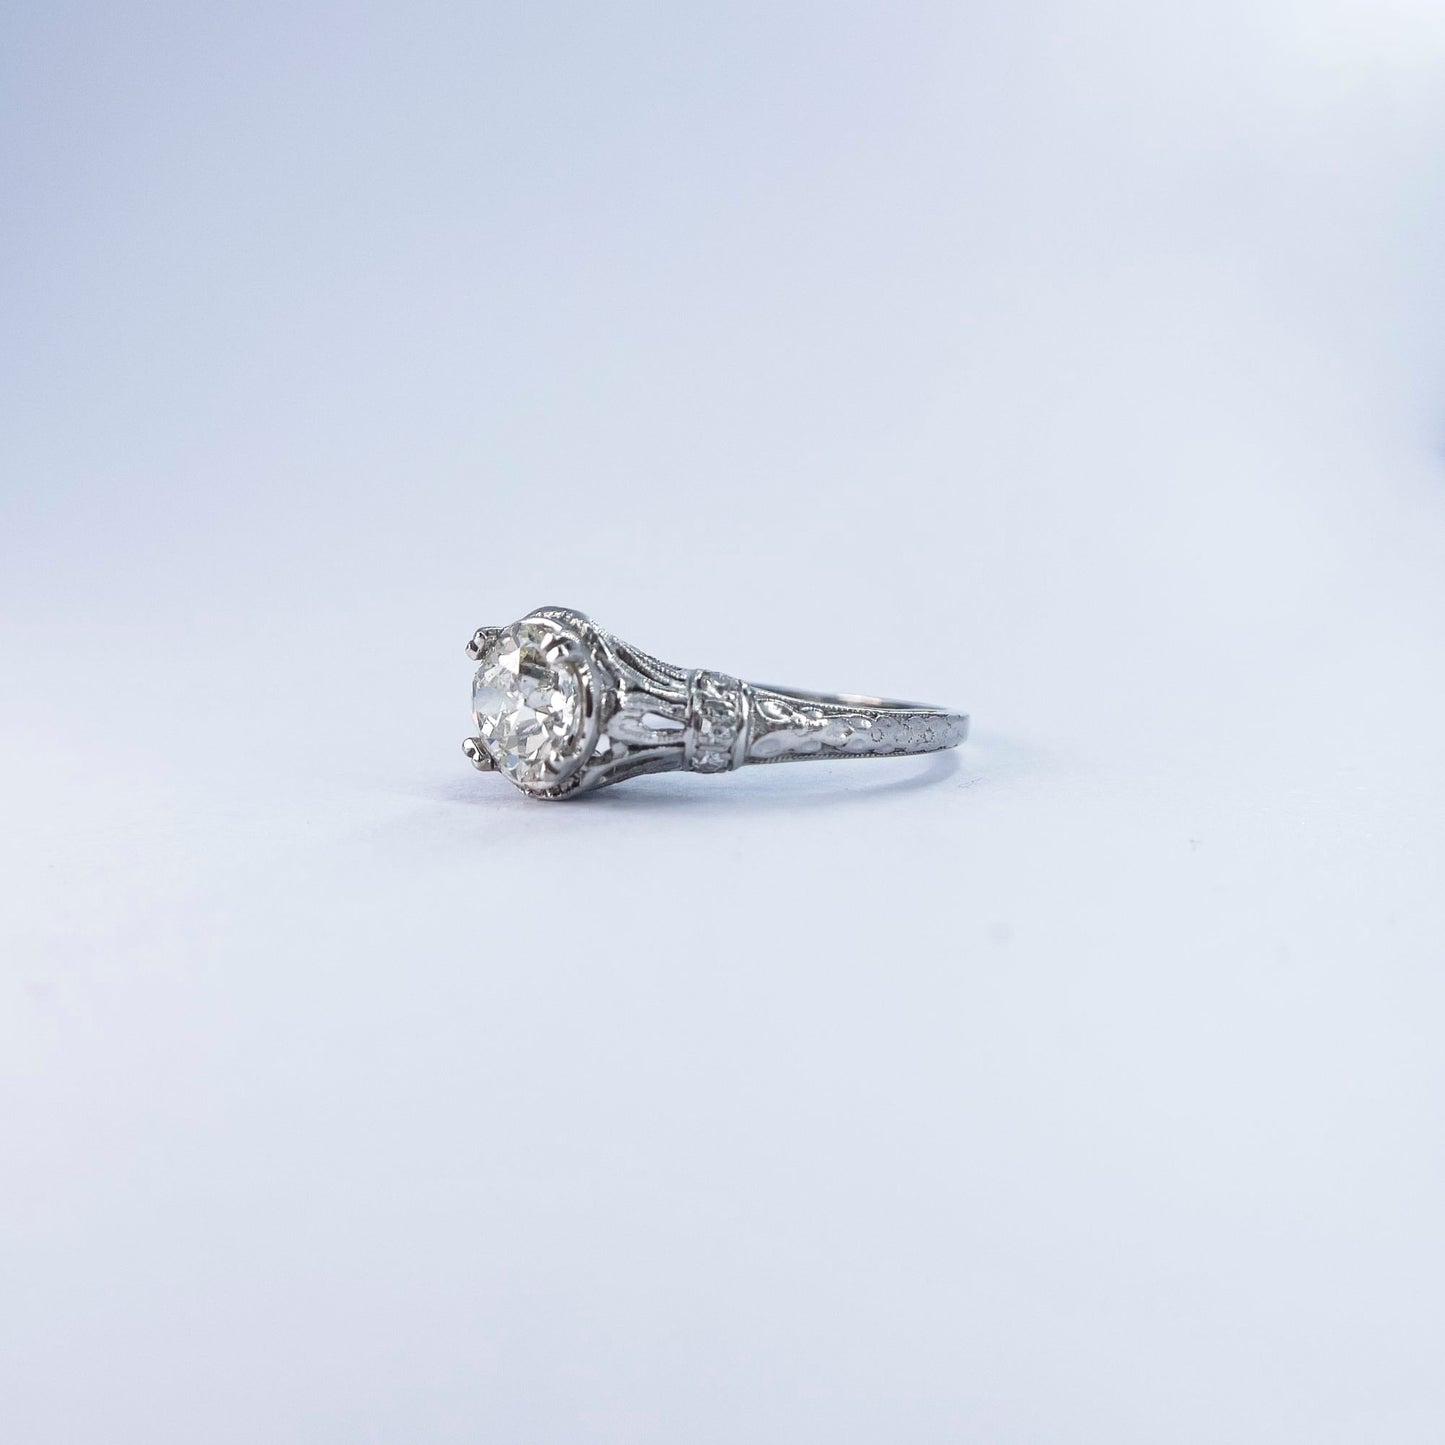 1920s Platinum Rose Cut Diamond Halo Ring with Old Cut Diamond Accents